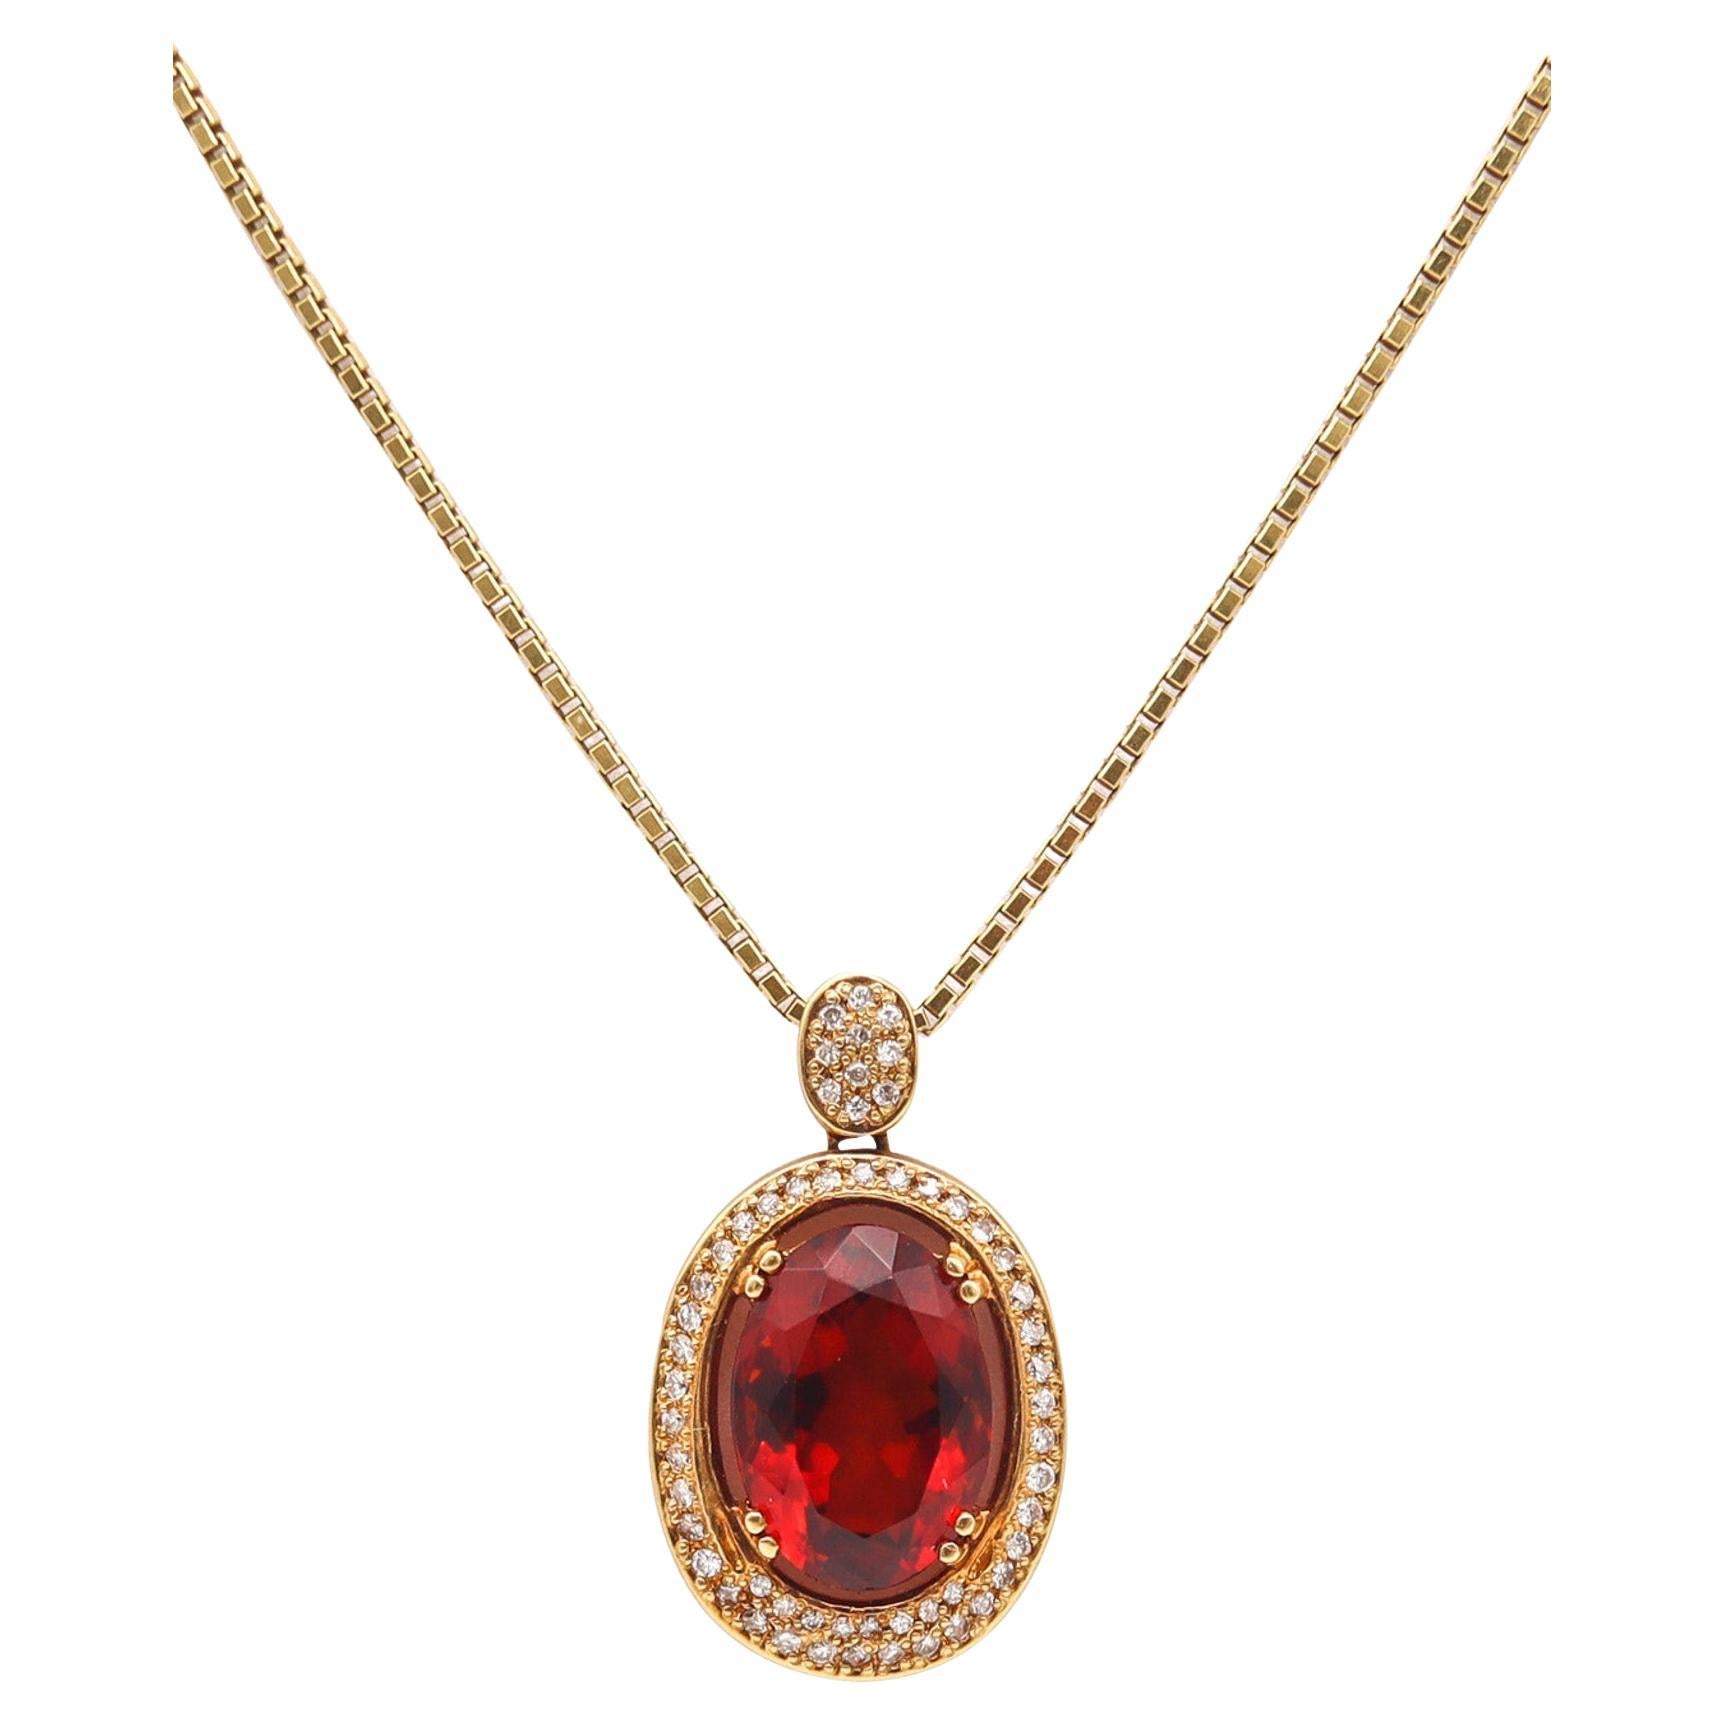 H Stern Brazil Necklace Pendant In 18Kt Gold With 14.77 Cts In Spinel & Diamonds For Sale